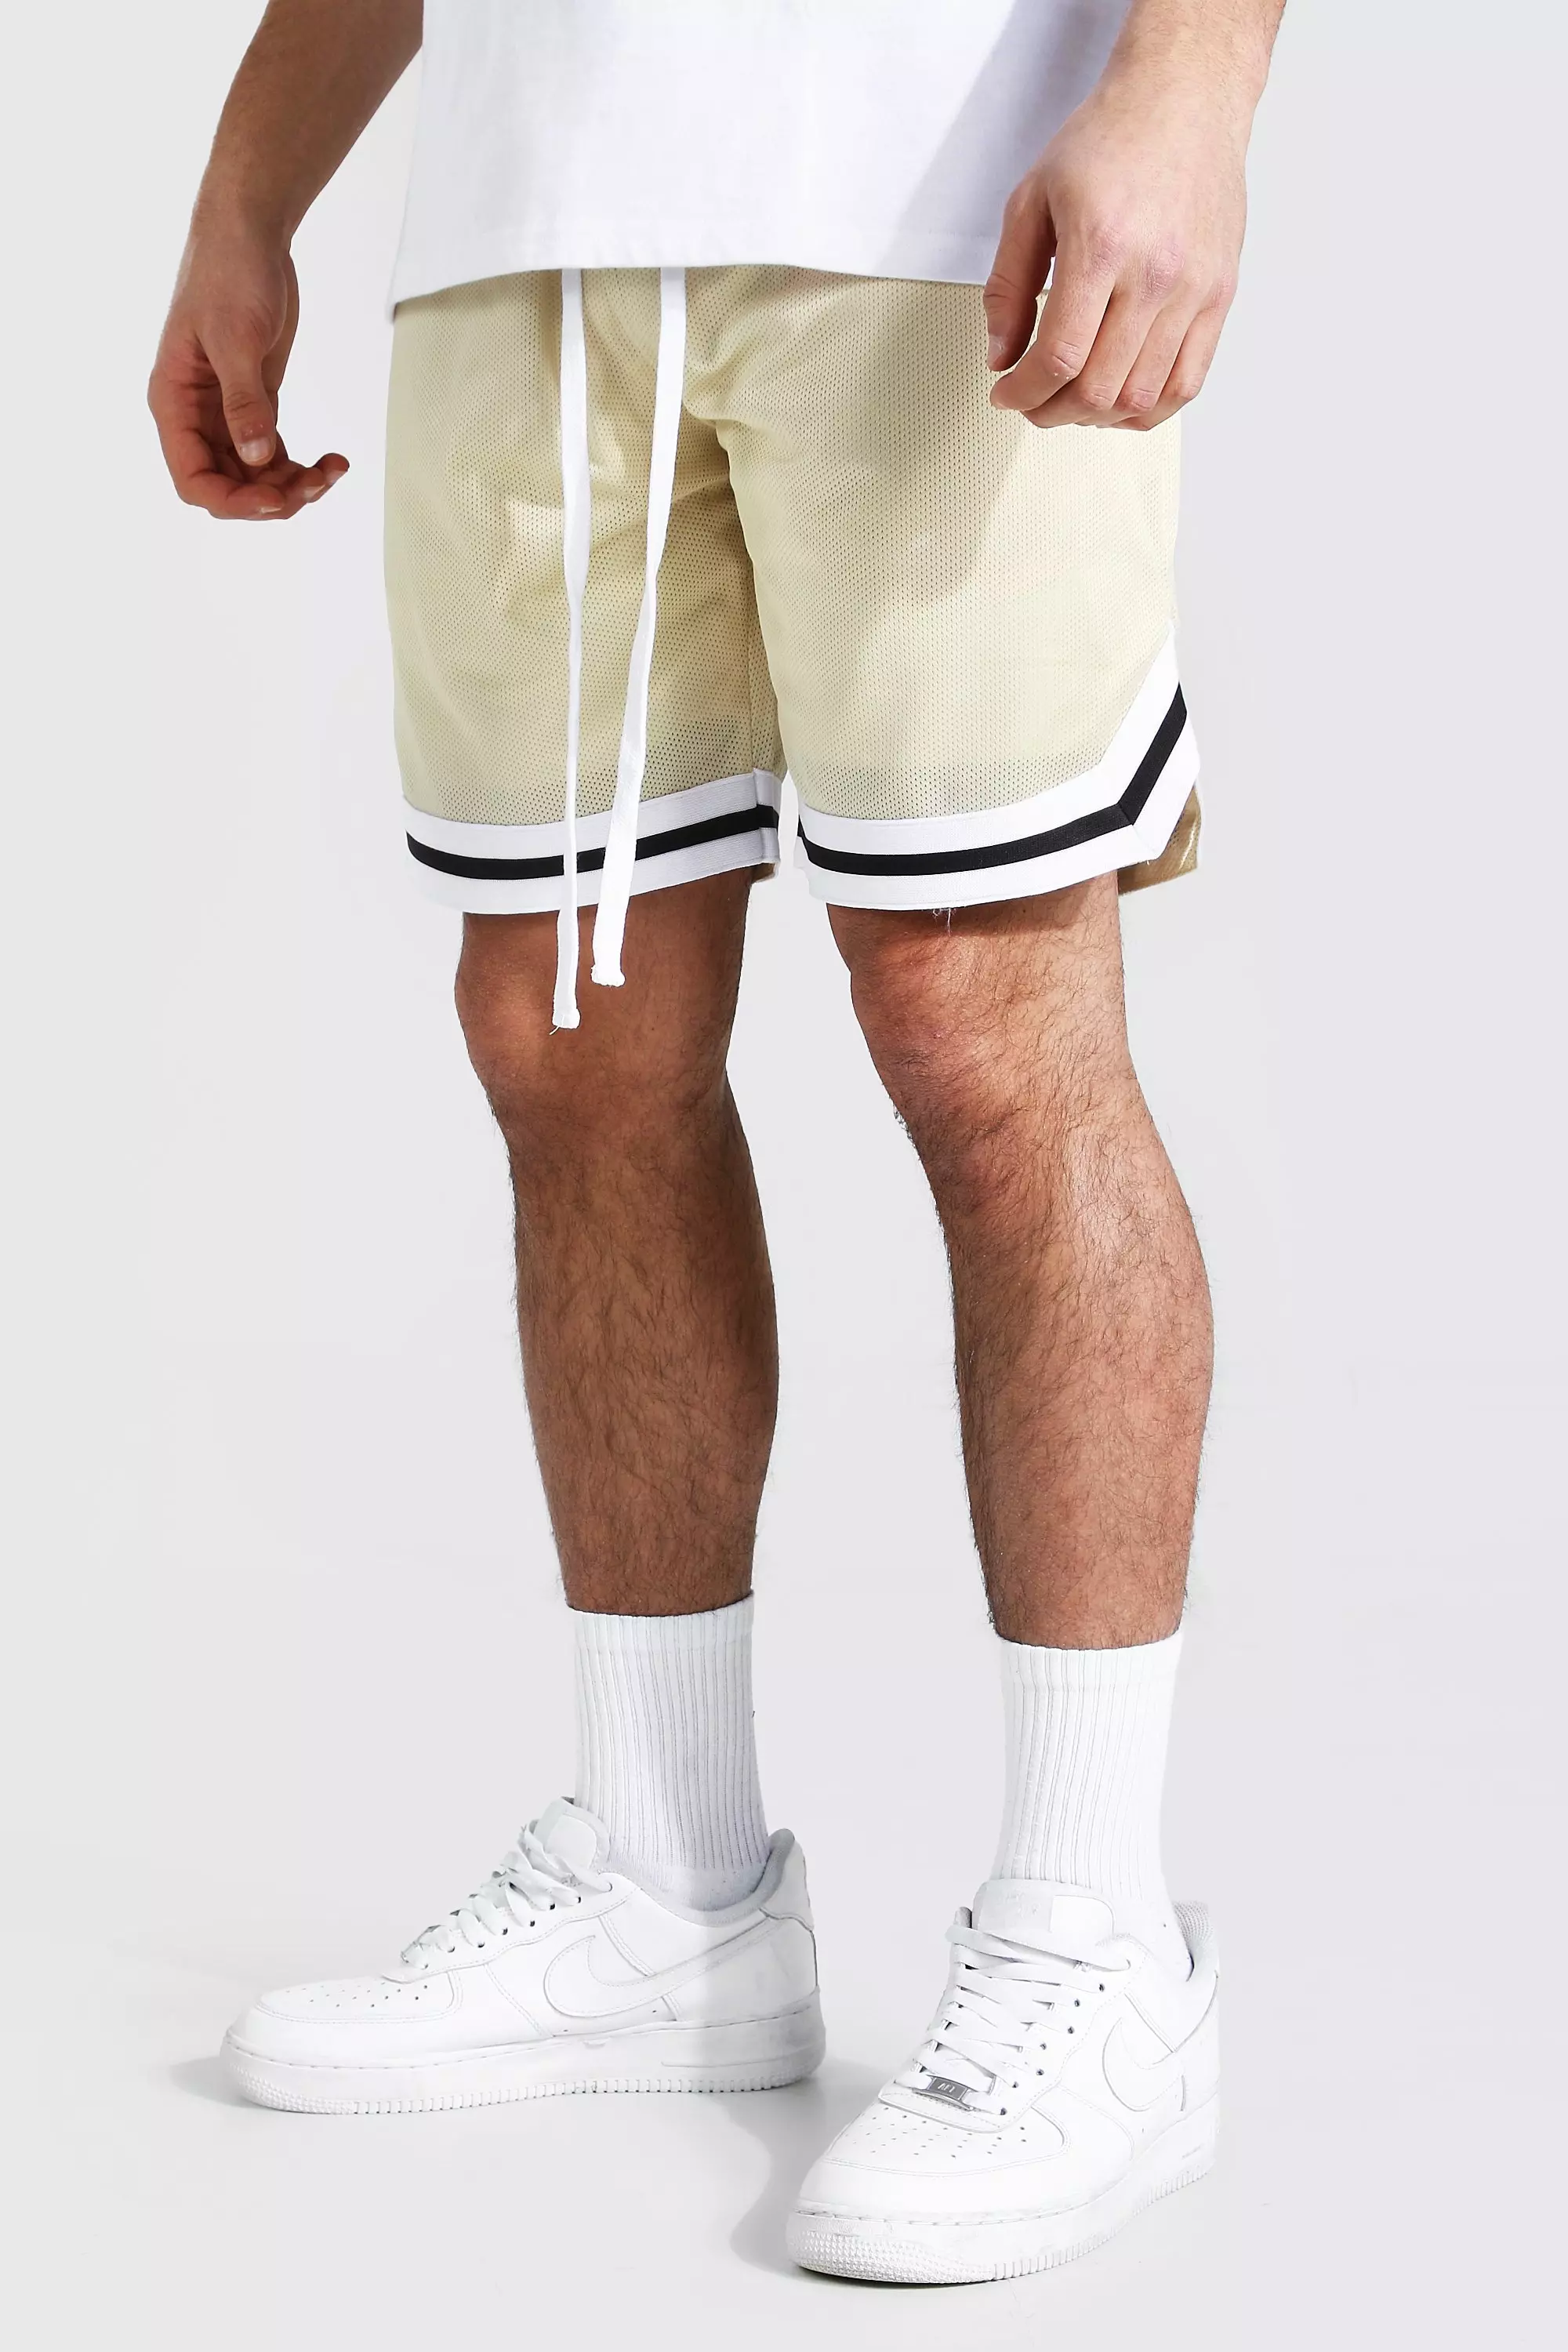 Mesh Basketball Shorts – Unified Ballers